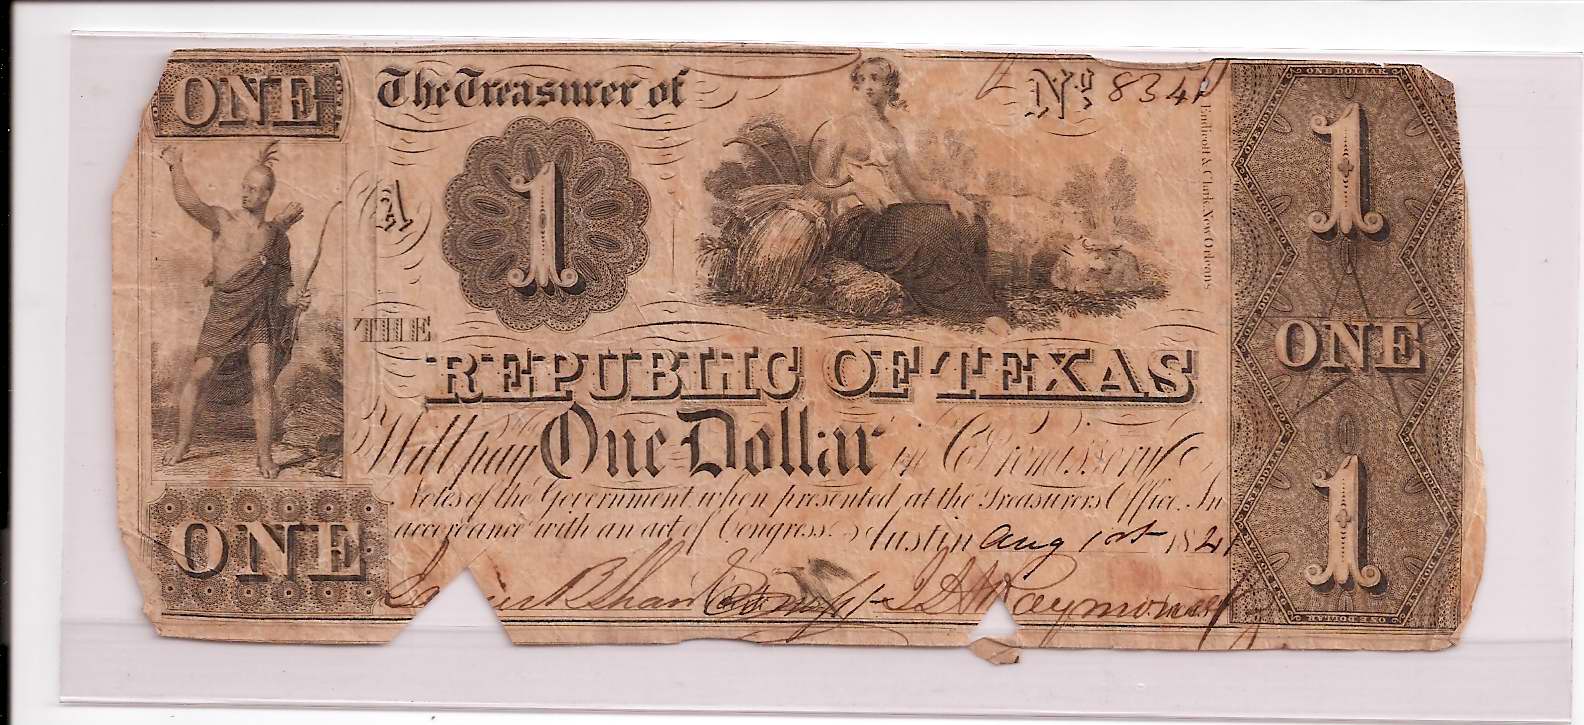 Object: Change Note (Republic of Texas $1.00 change note)